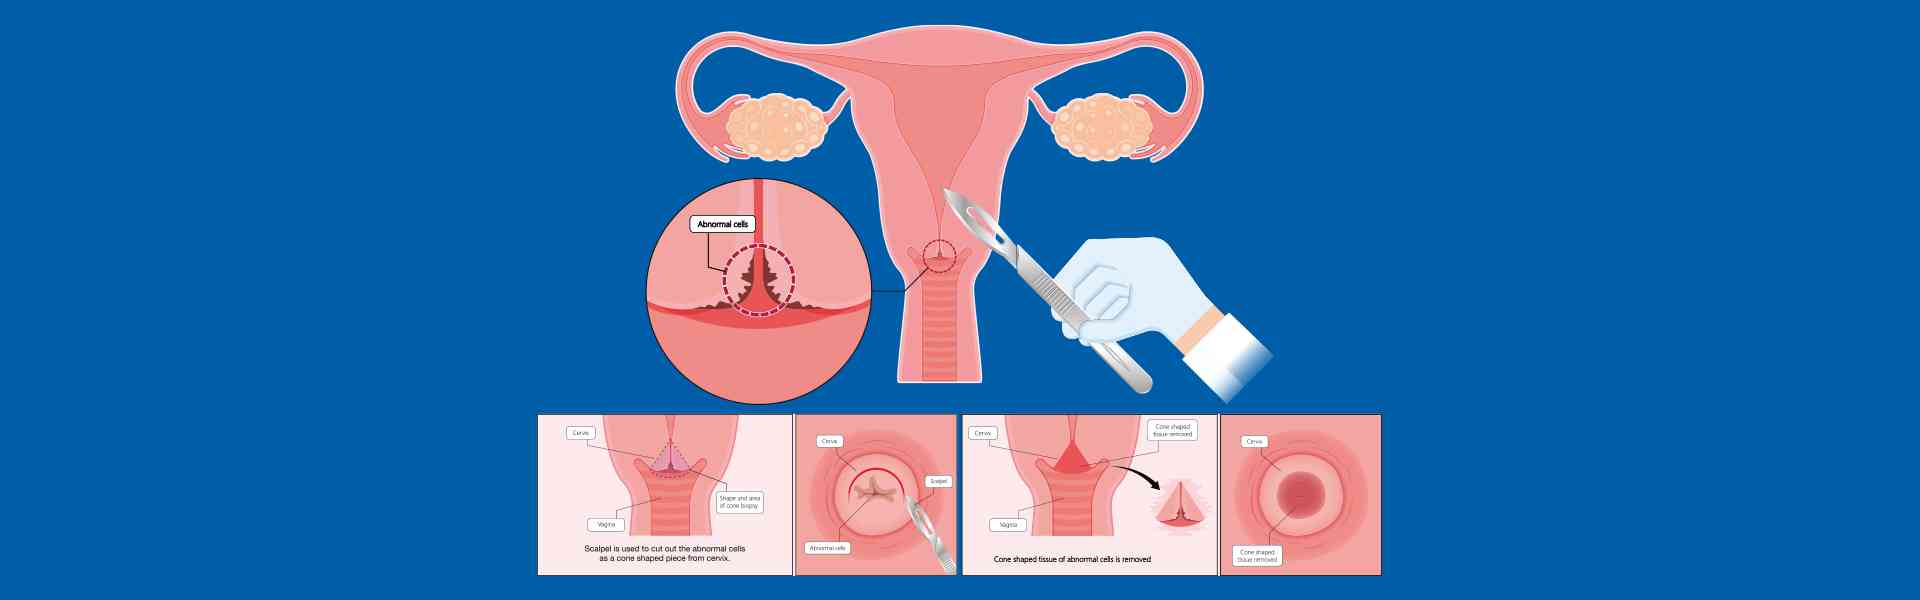 Pap Smear Test in Gurgaon